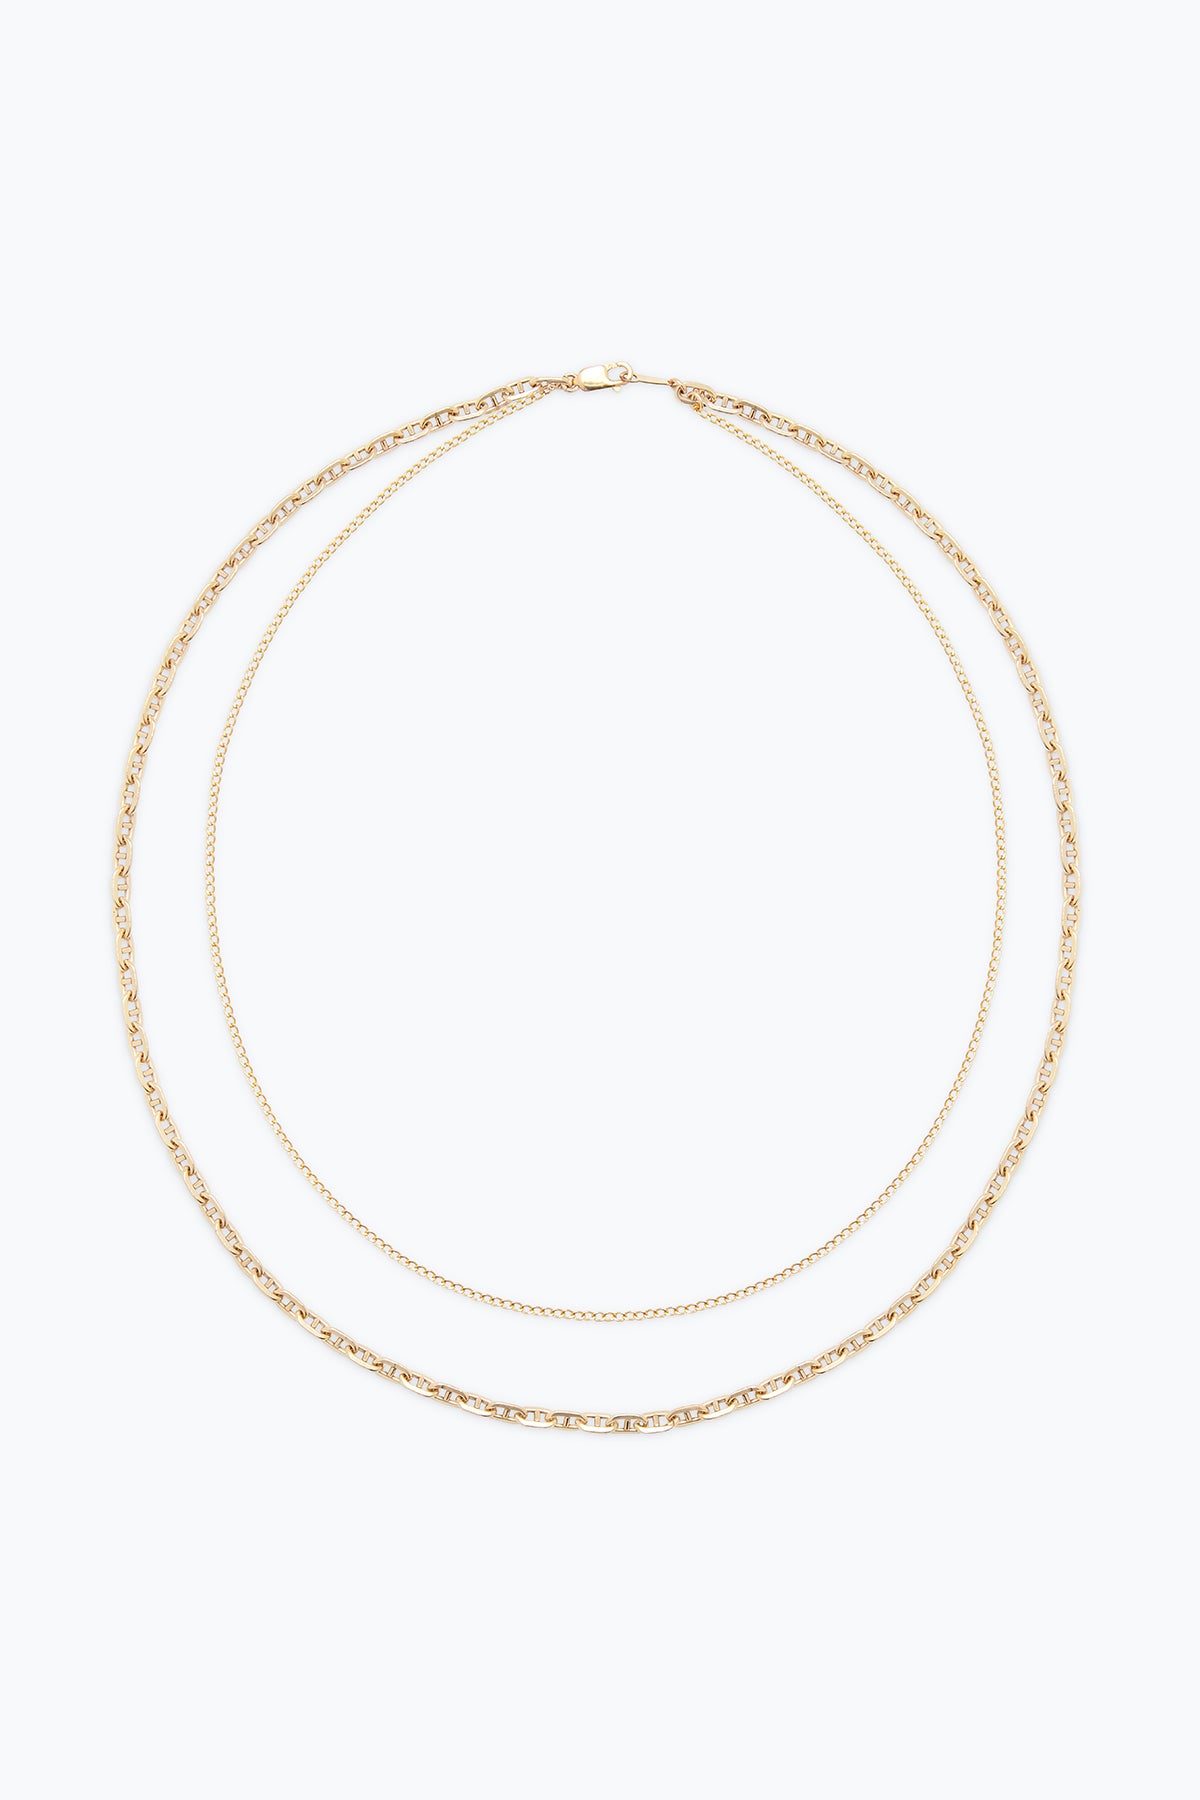   Dede Necklace by Phyllis & Rosie 